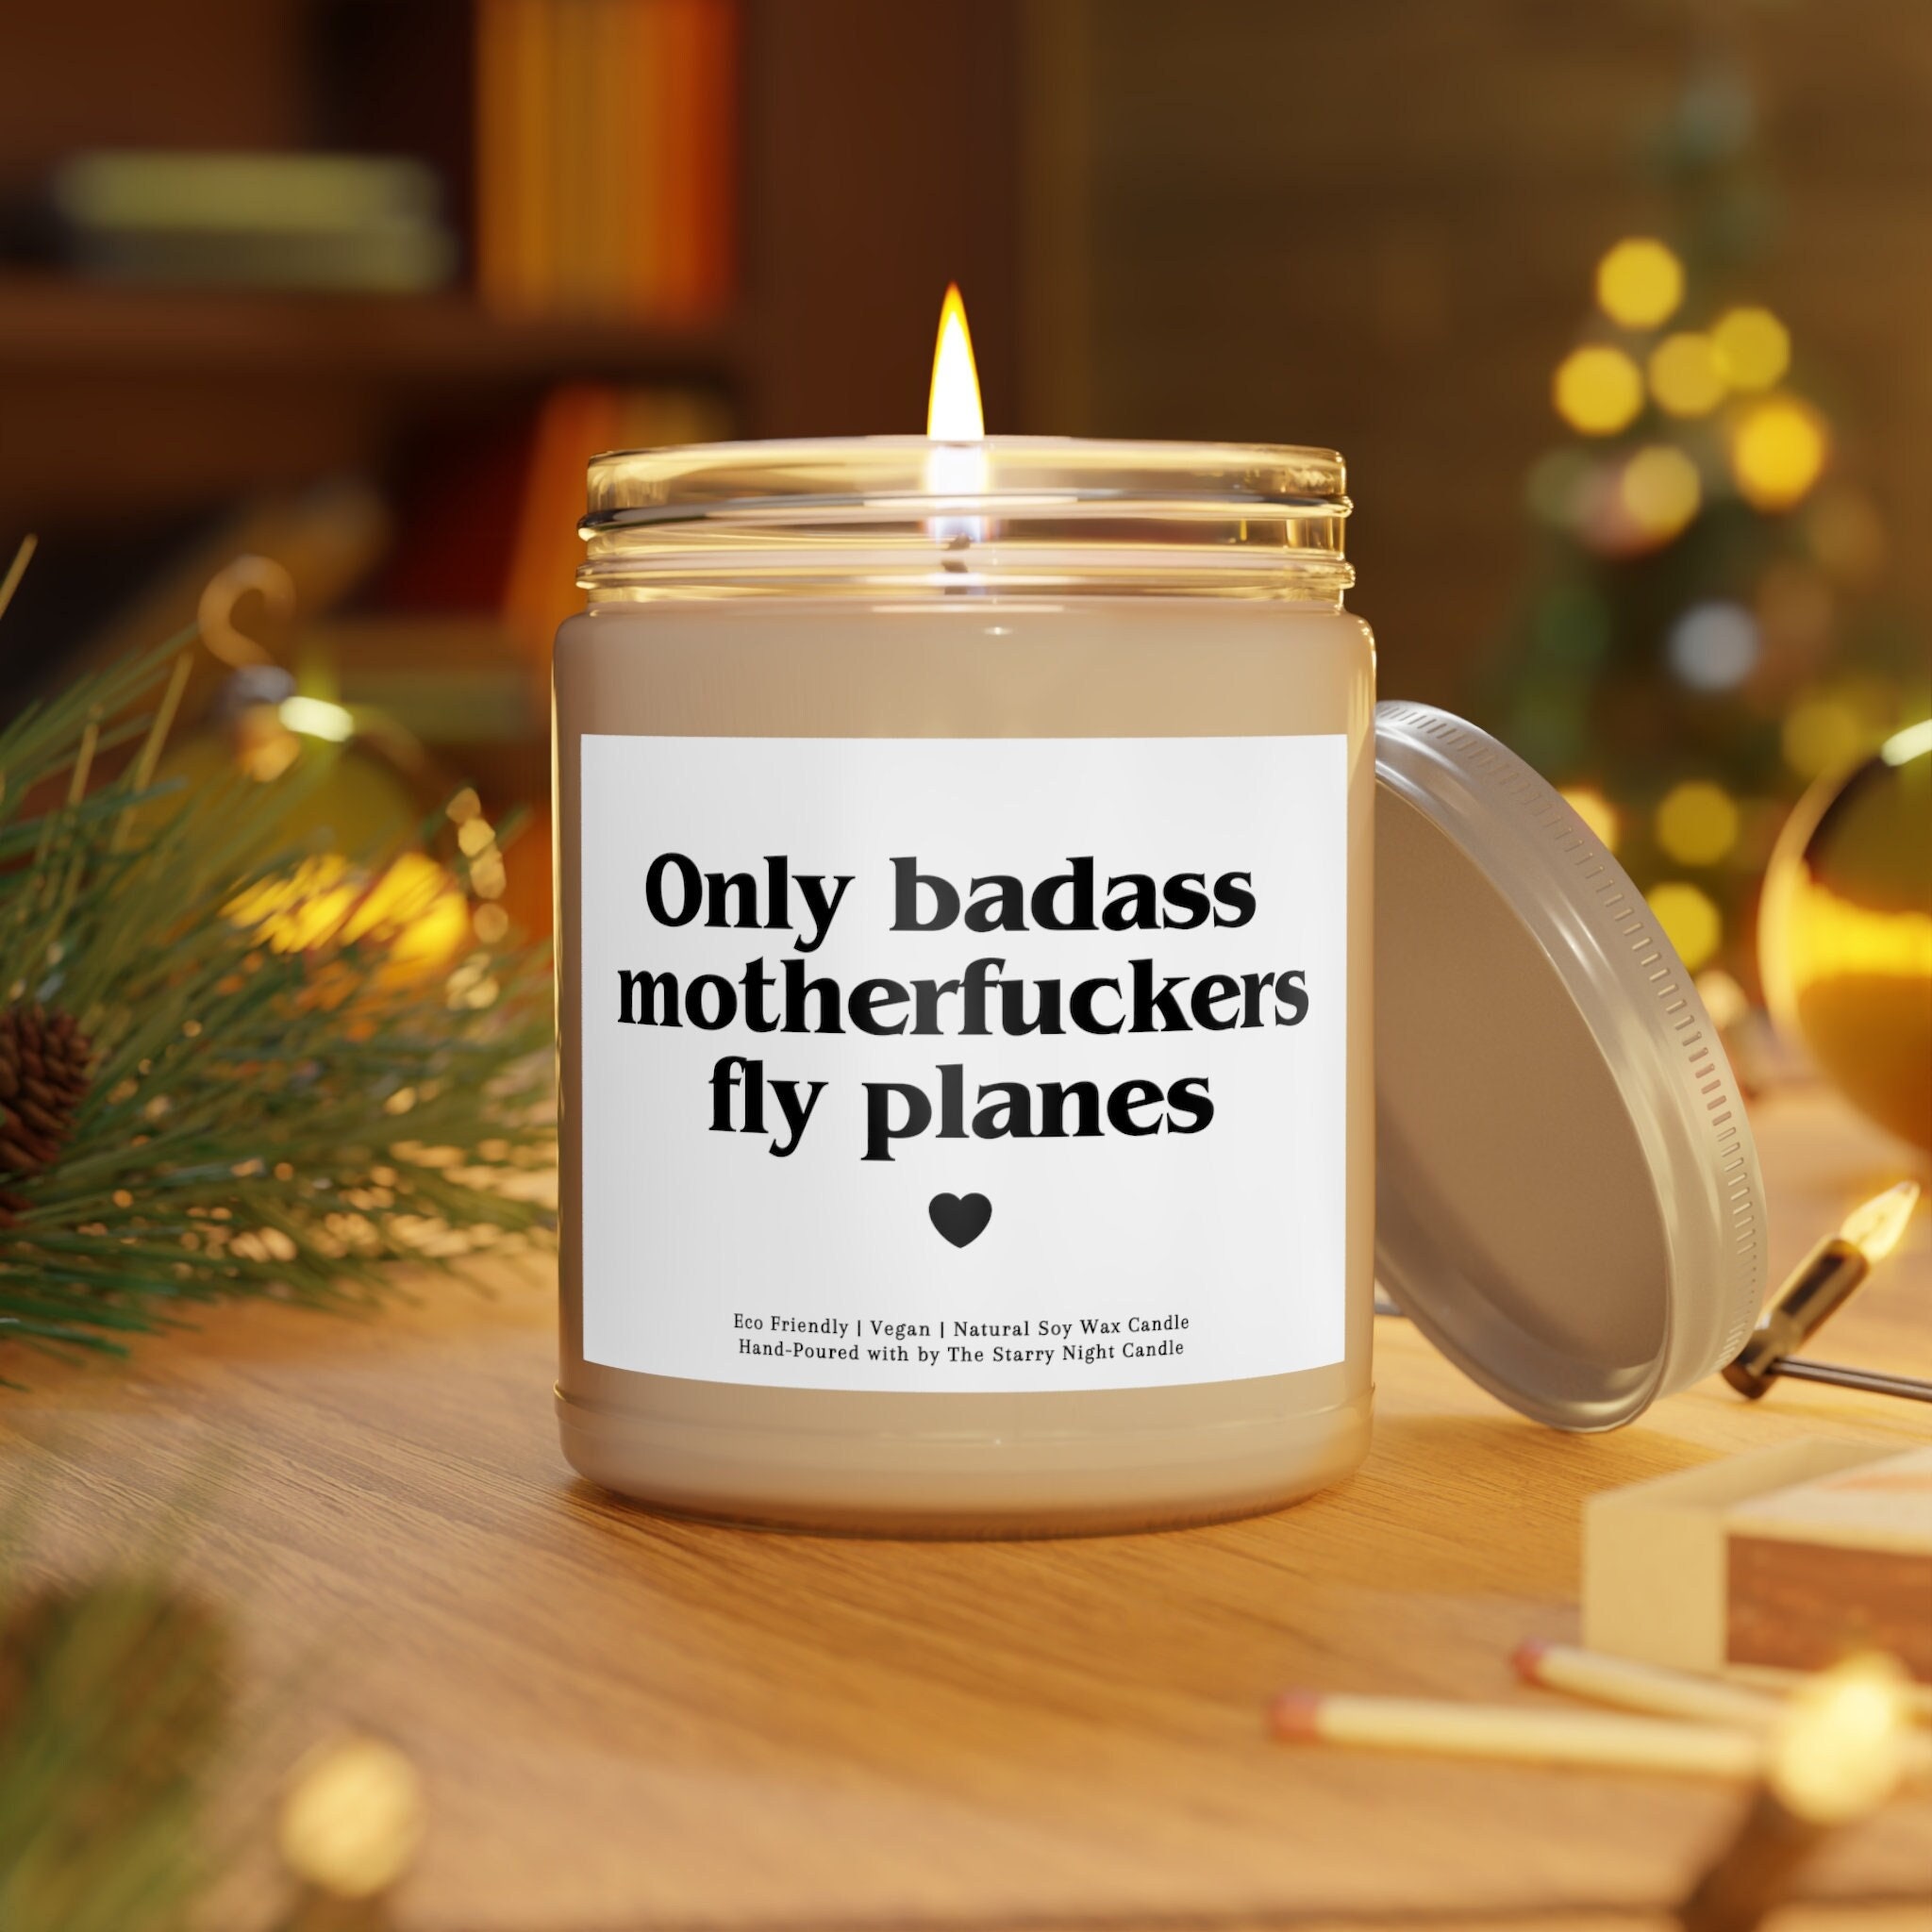 NEW AIRPLANE SMELL Leather & Freedom: Airplane Candle, Scented Candle,  Pilot Decor 